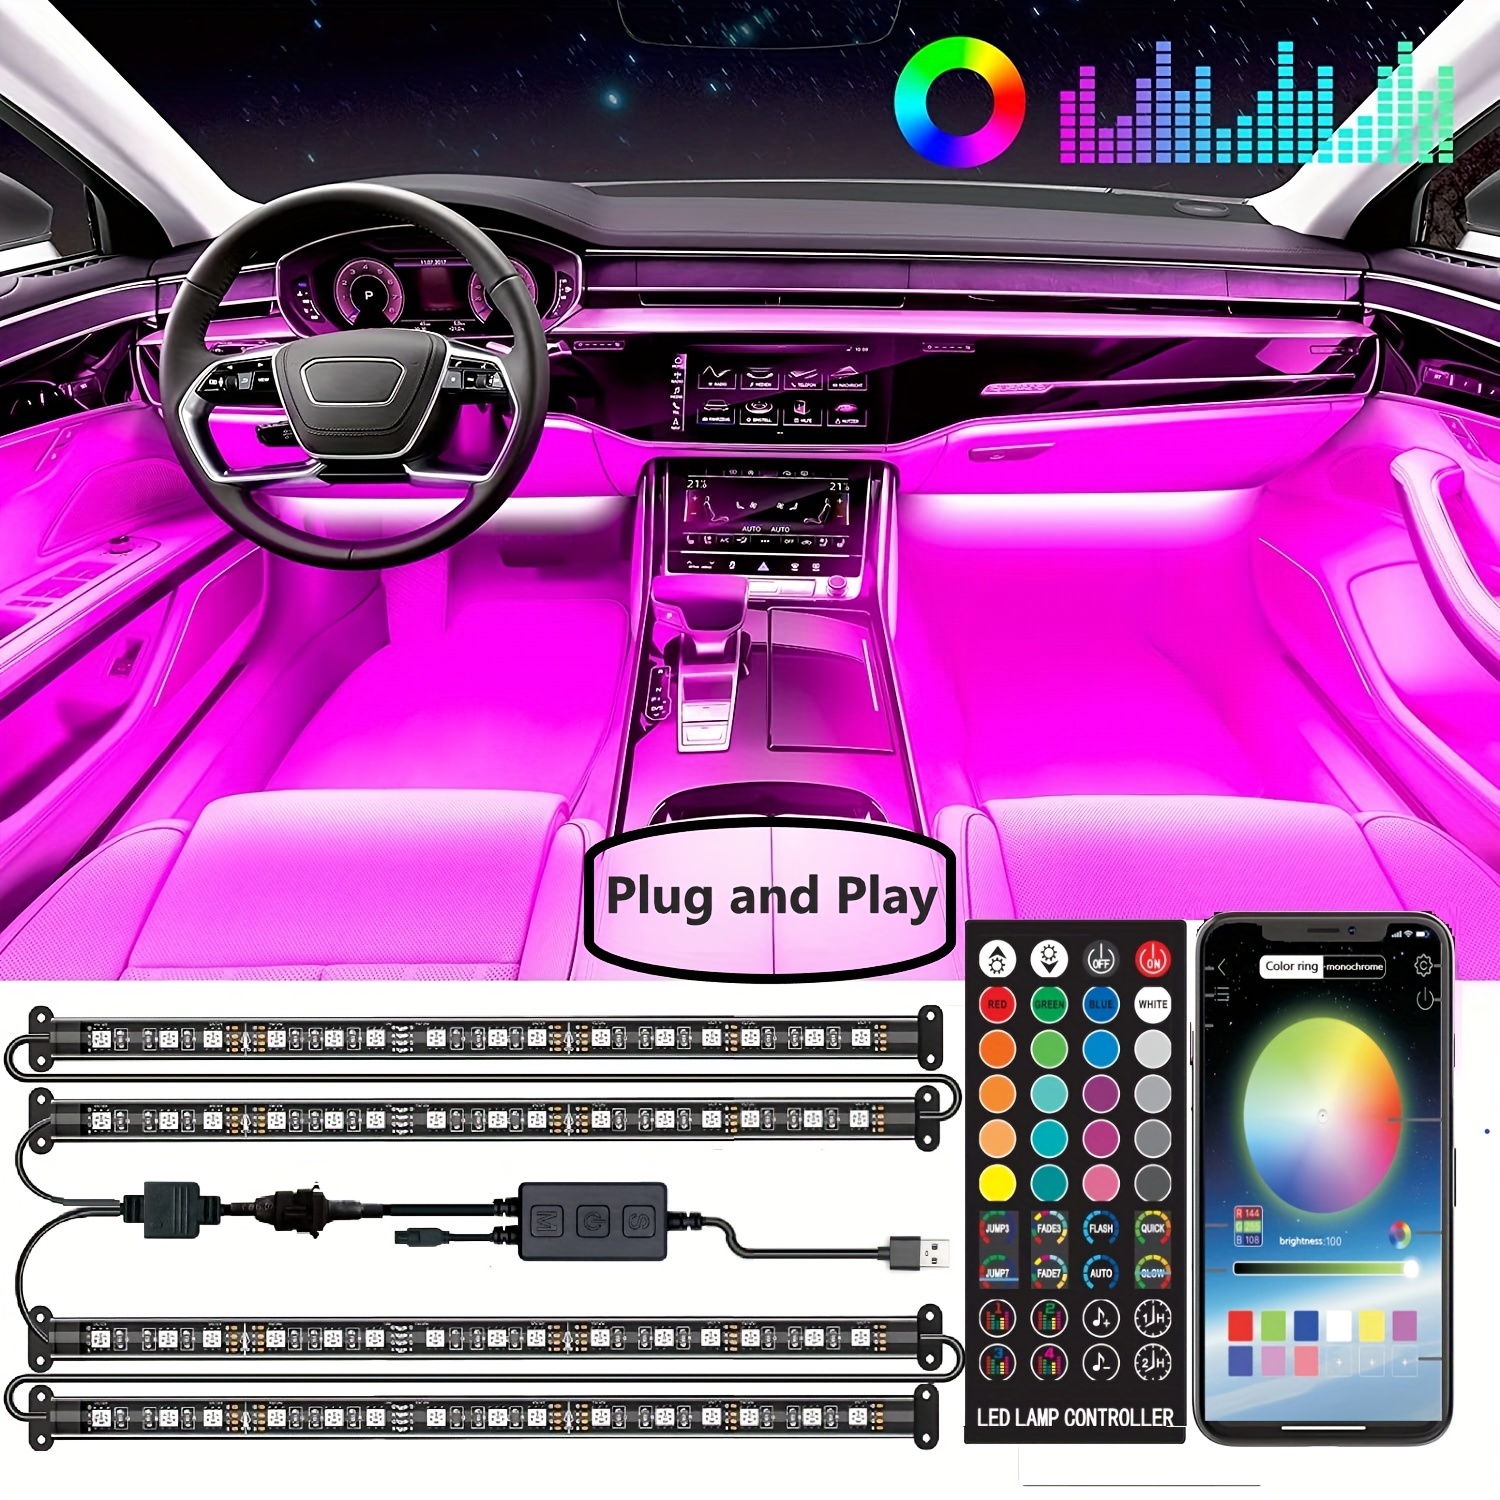 LED Lights For Car, LED Lights Interior Car Accessories With 2 In 1 Design,  16Million Colors Music DIY Under Dash Car Lights, DC 5V, Plug And Play.